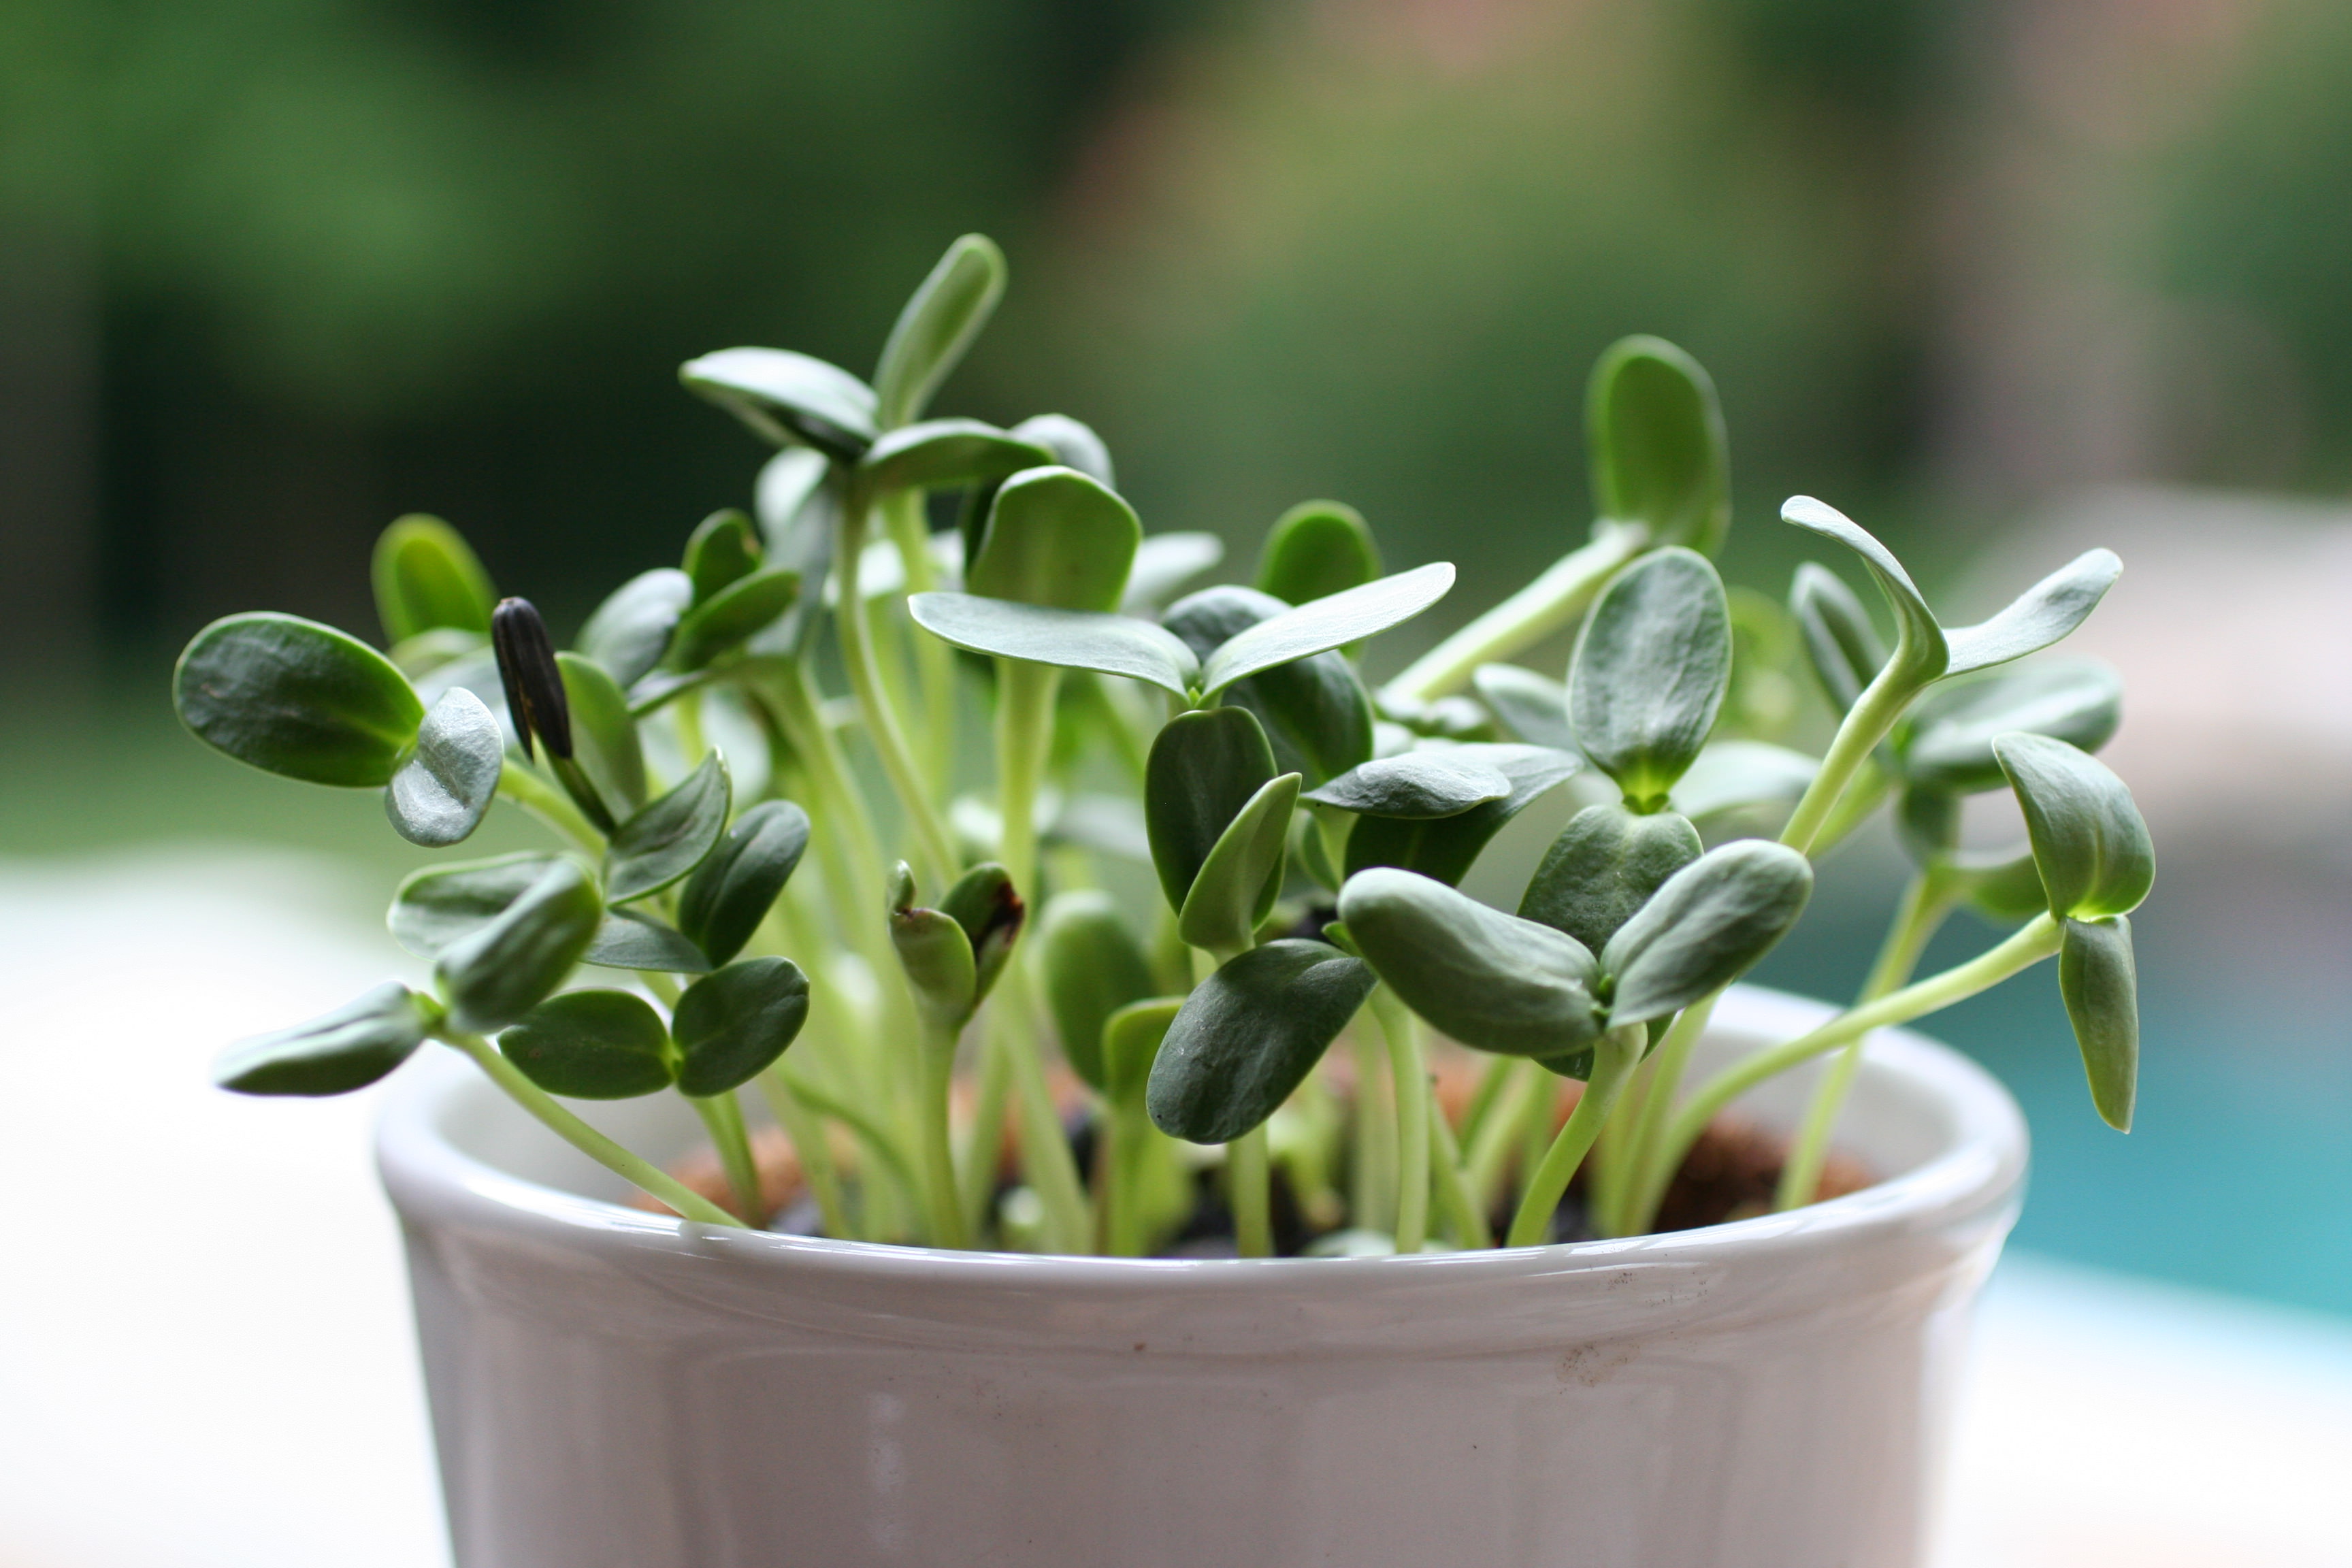 Sunflower sprouts photo